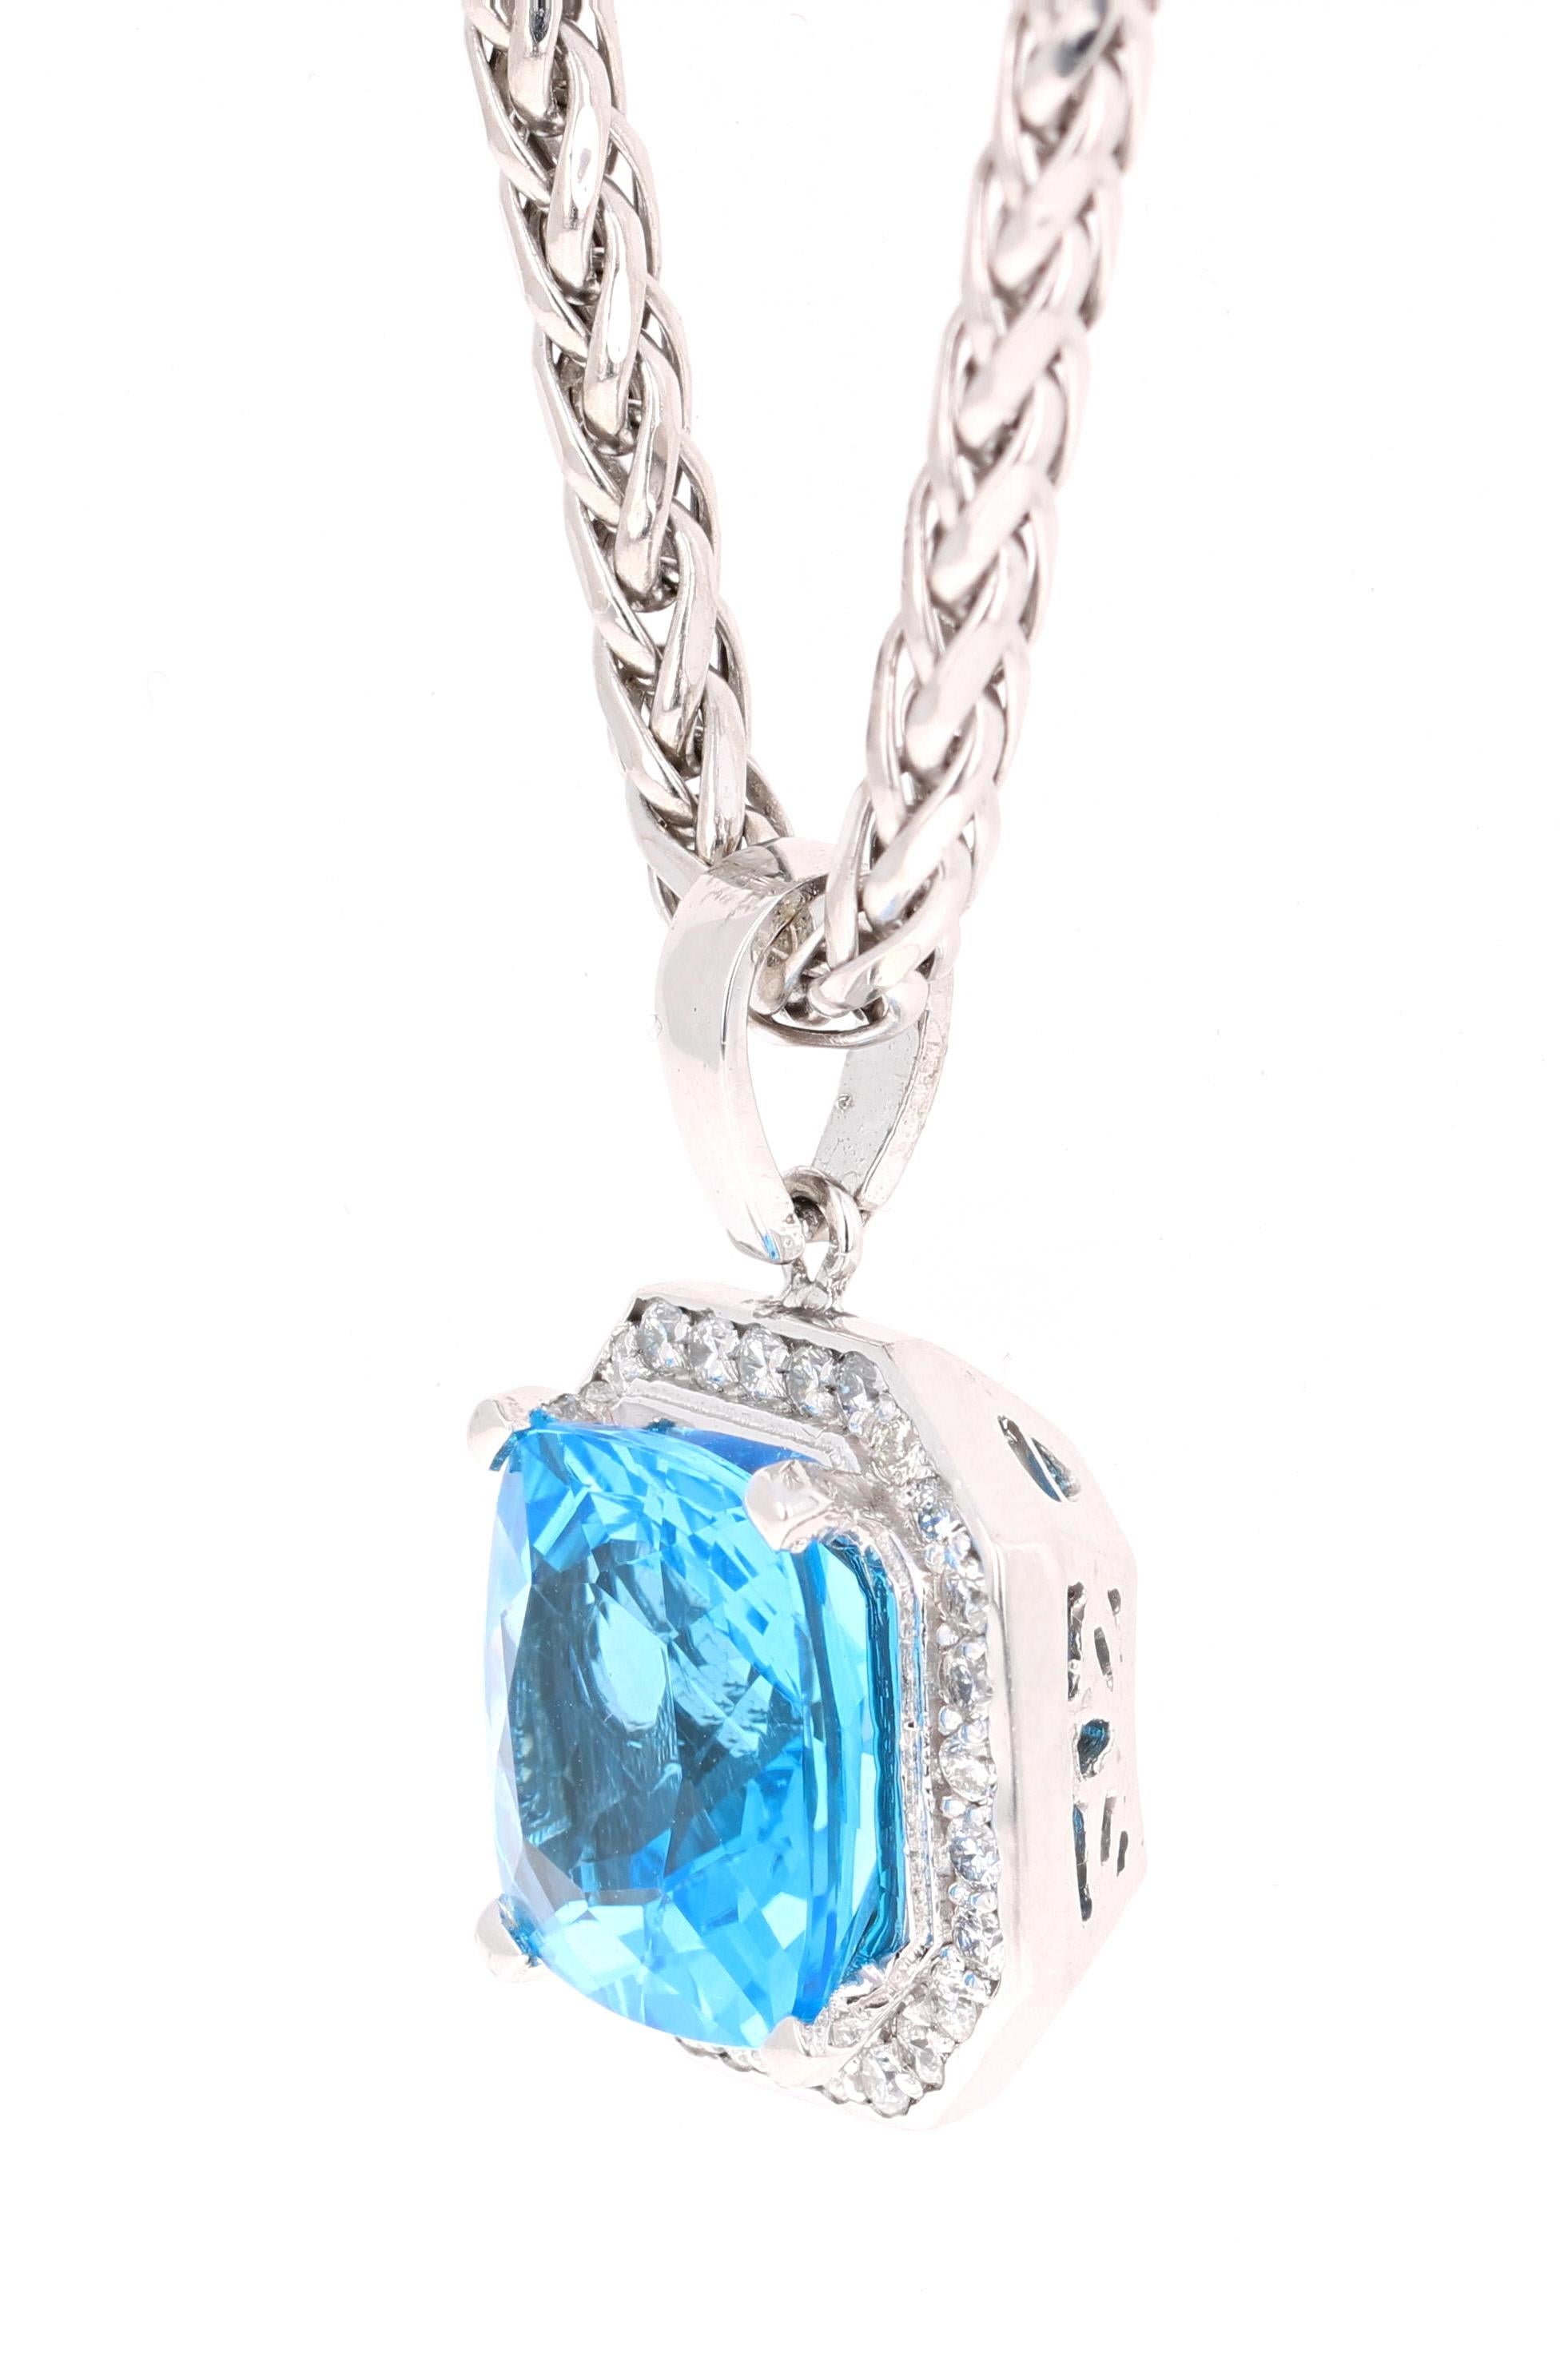 A beautiful deep Blue Topaz and Diamond Pendant with a detachable chain that is sure to take your accessory collection to the next level.

The pendant has a beautiful Cushion Cut Blue Topaz in the center which weighs 10.61 carats.  The Pendant is